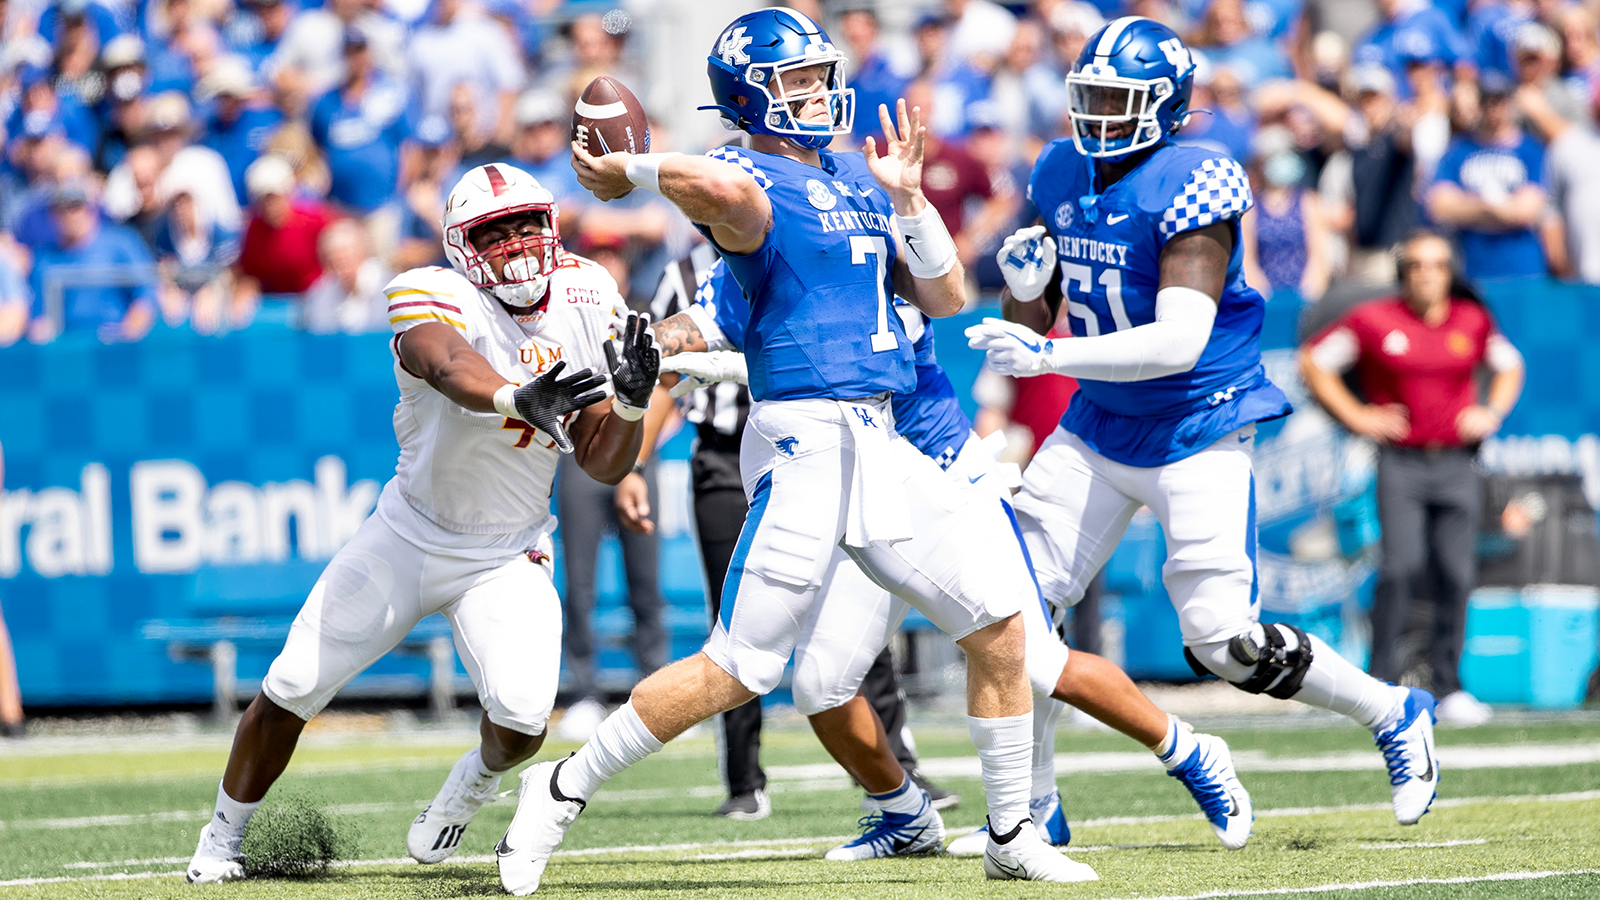 Kentucky Offense Adjusting as Trip to Columbia Looms